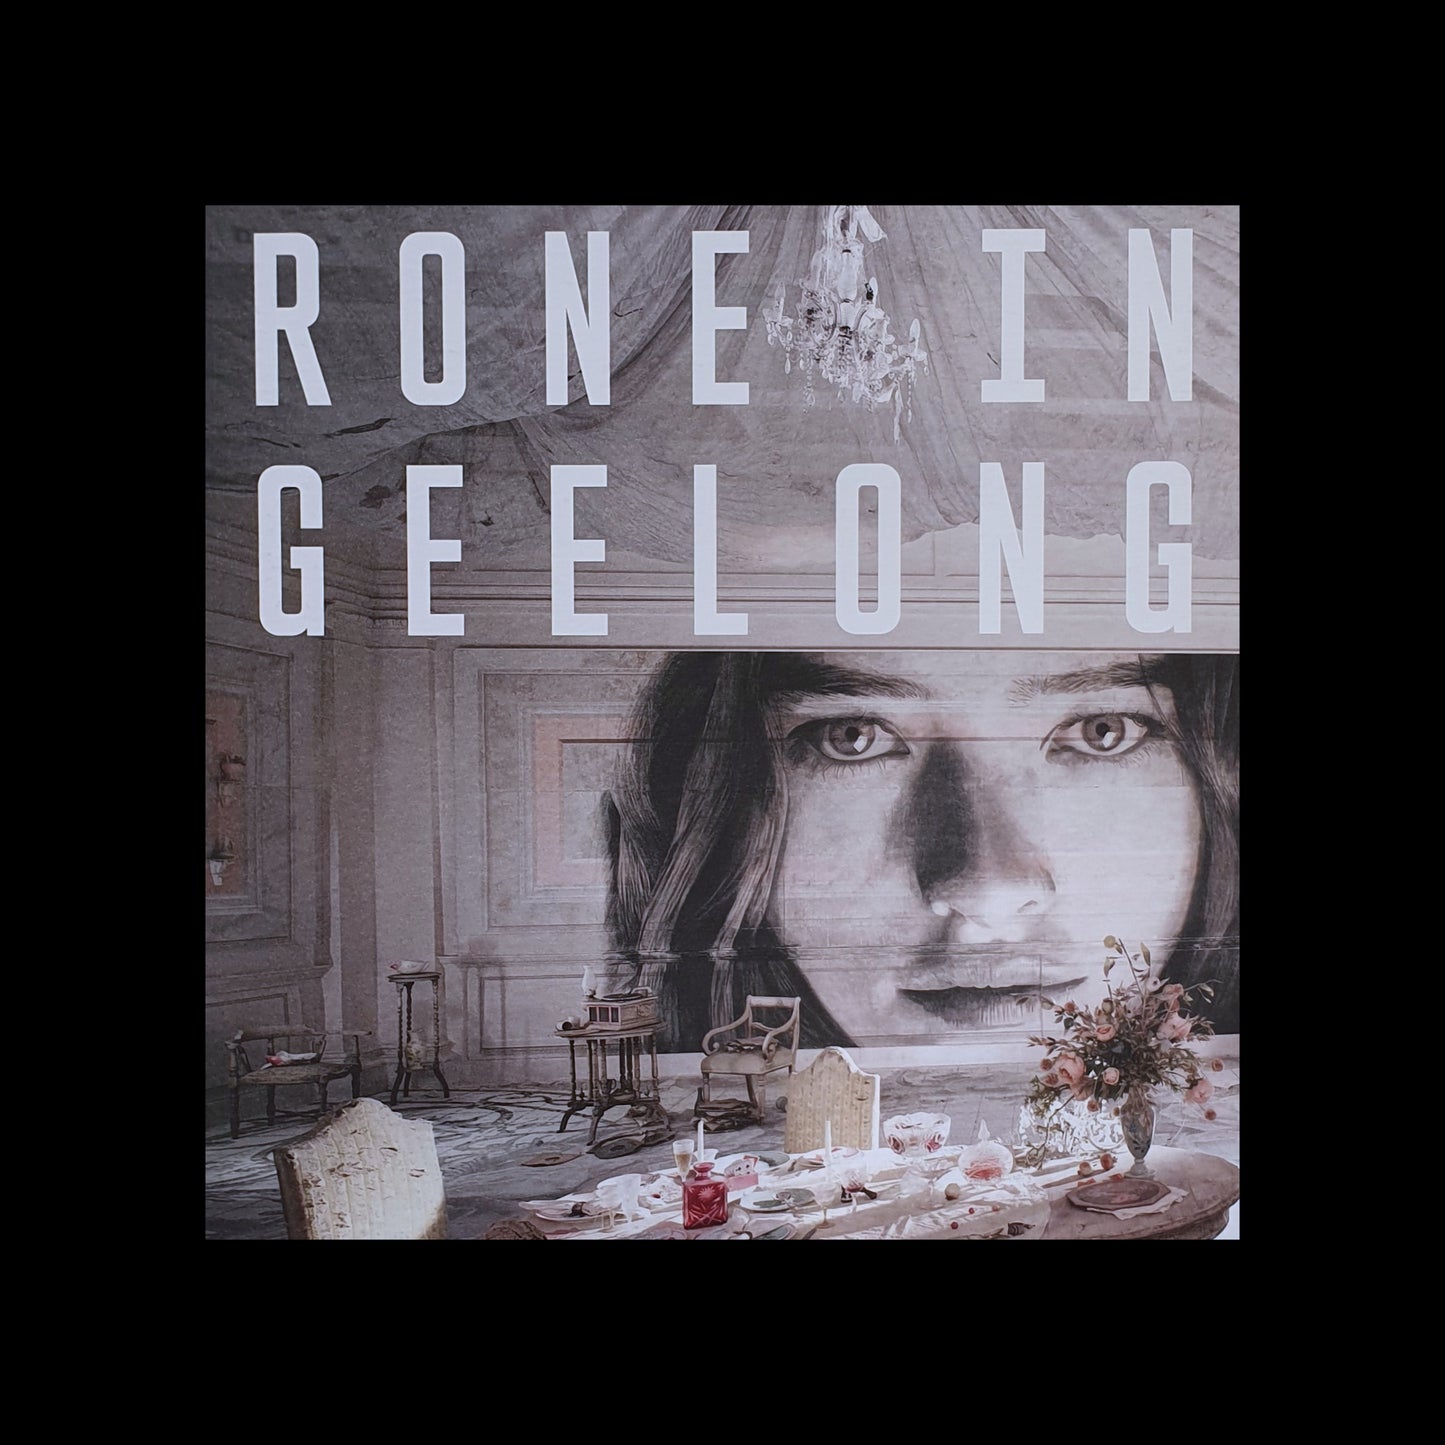 RONE in Geelong catalogue